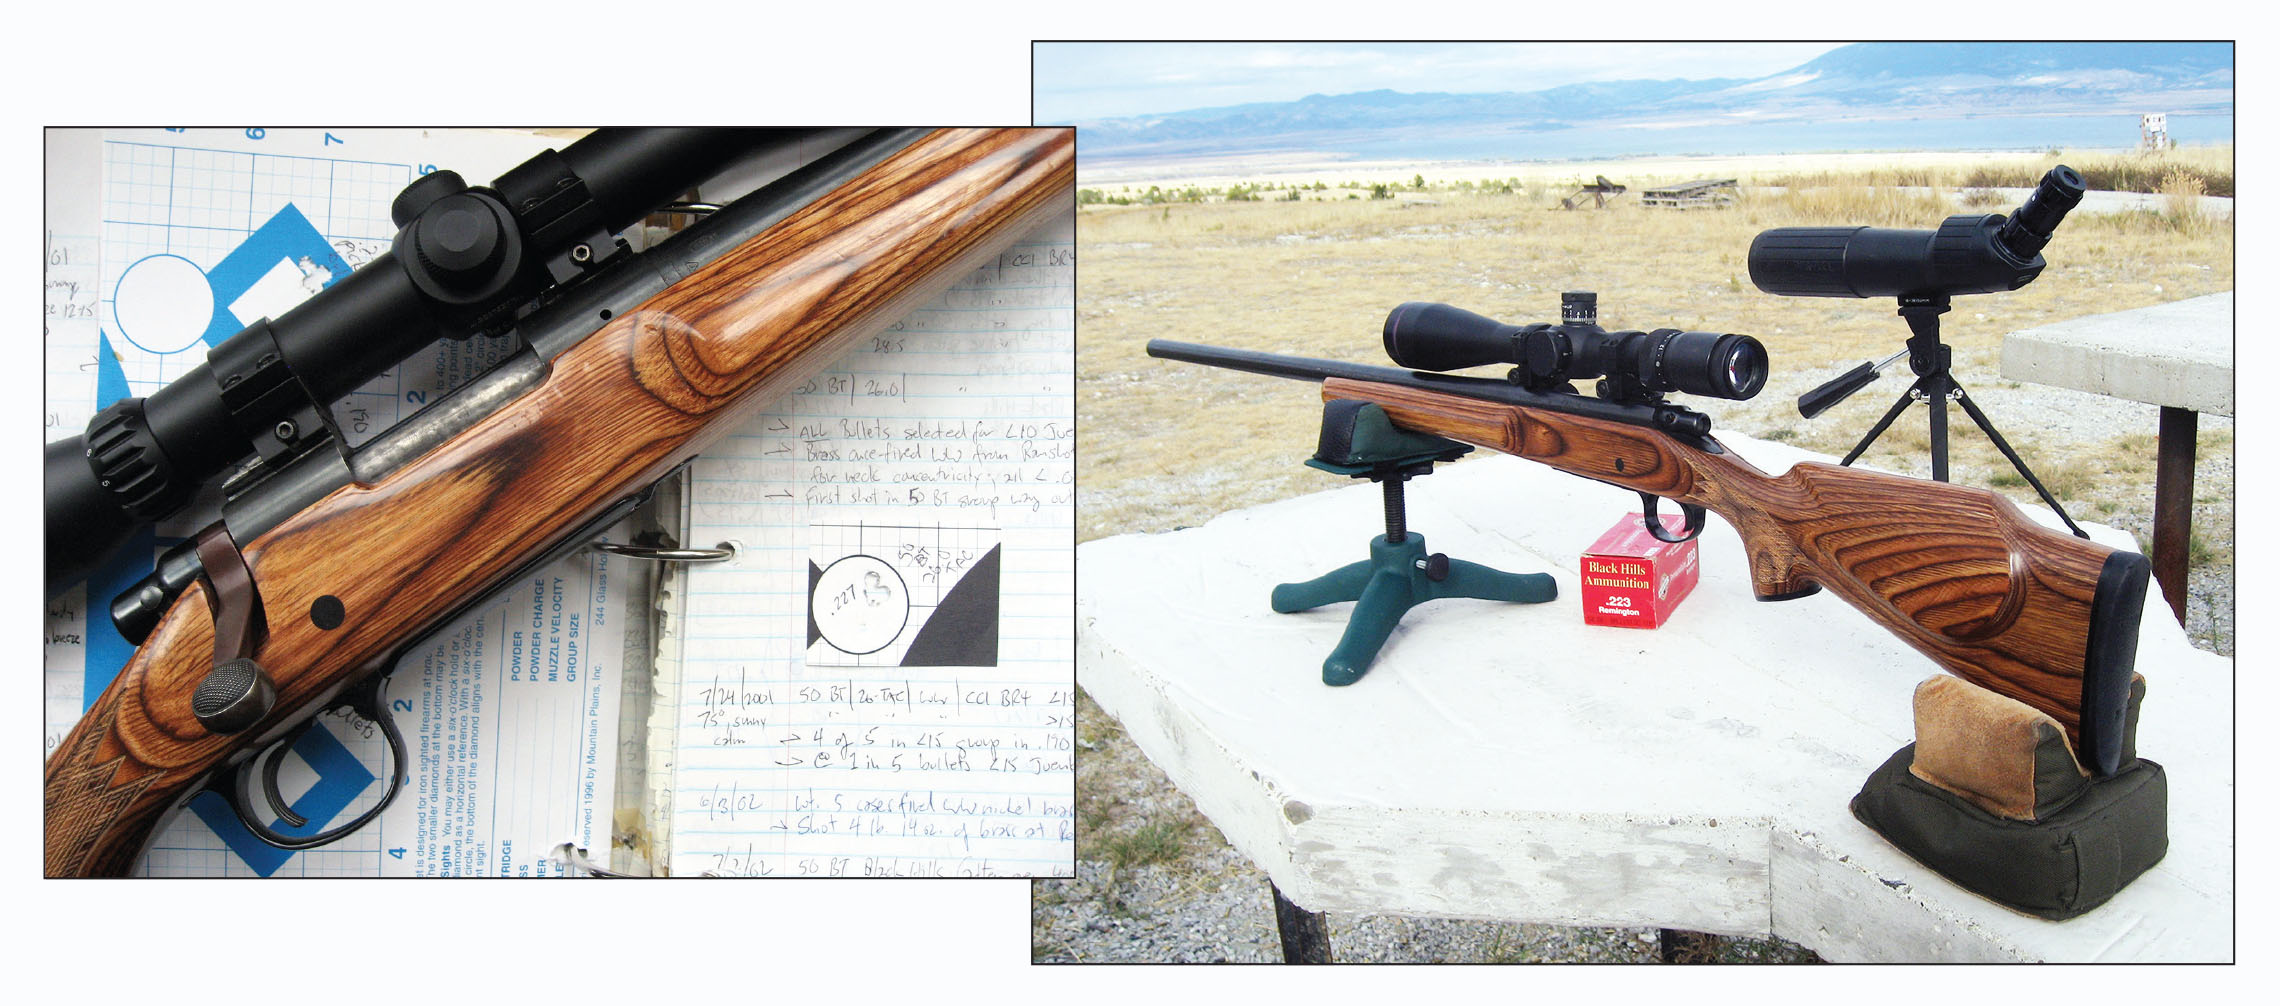 This .227-inch, 5-shot group was fired from the laminated 700 Varmint listed in the table. The group was smaller than average, but not much. With a scope, the rifle weighs 11.6 pounds.